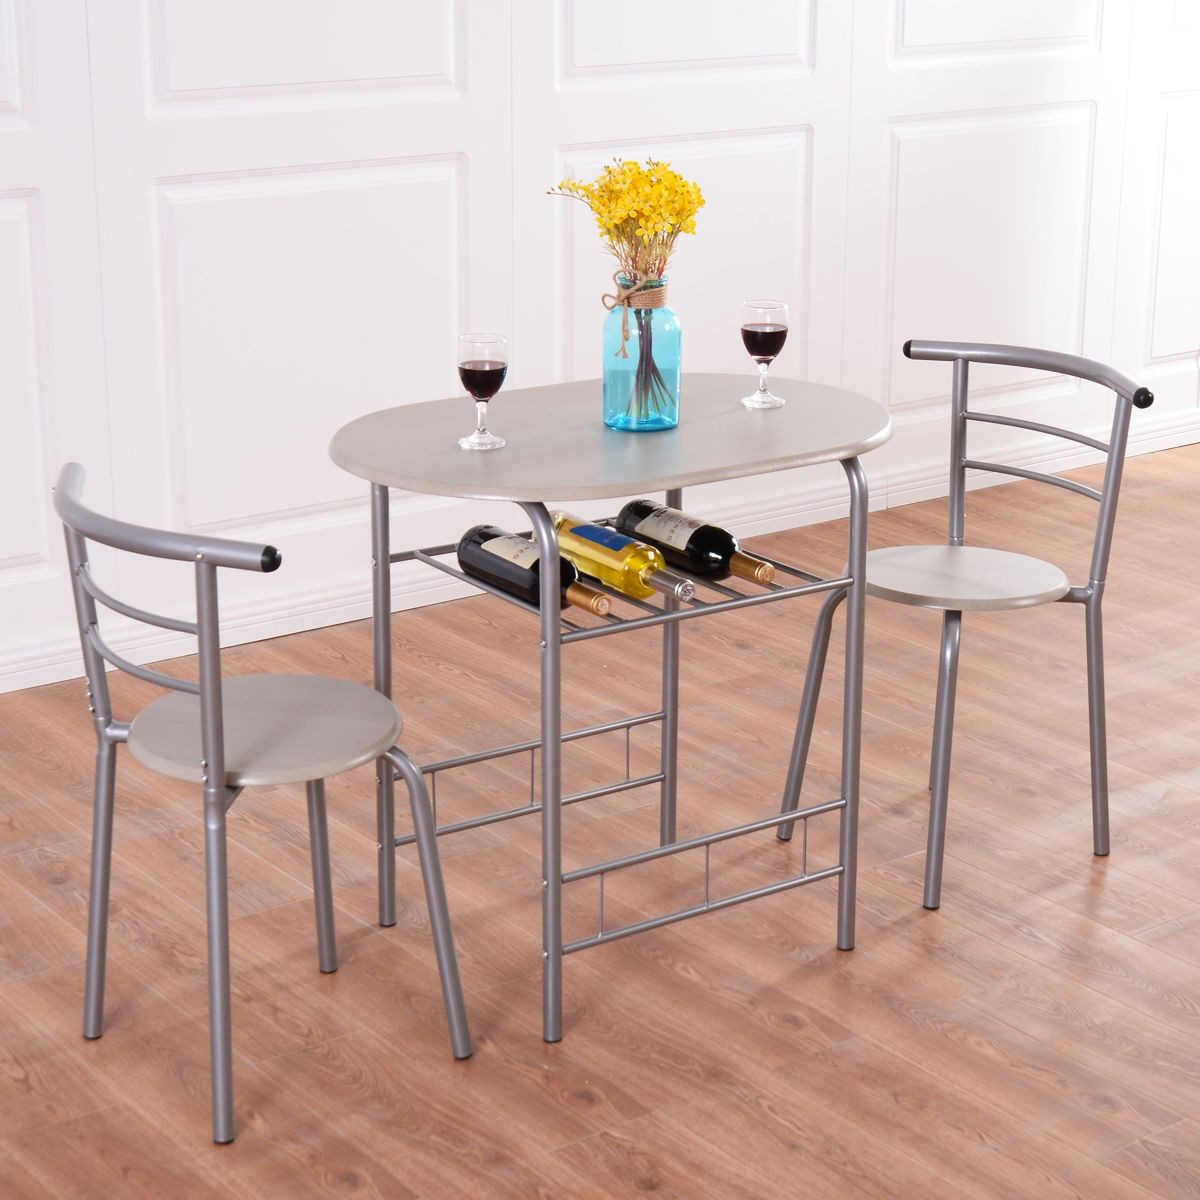 Small Bistro Tables For Kitchen
 3pcs Bistro Dining Set Small Kitchen Indoor Outdoor Table